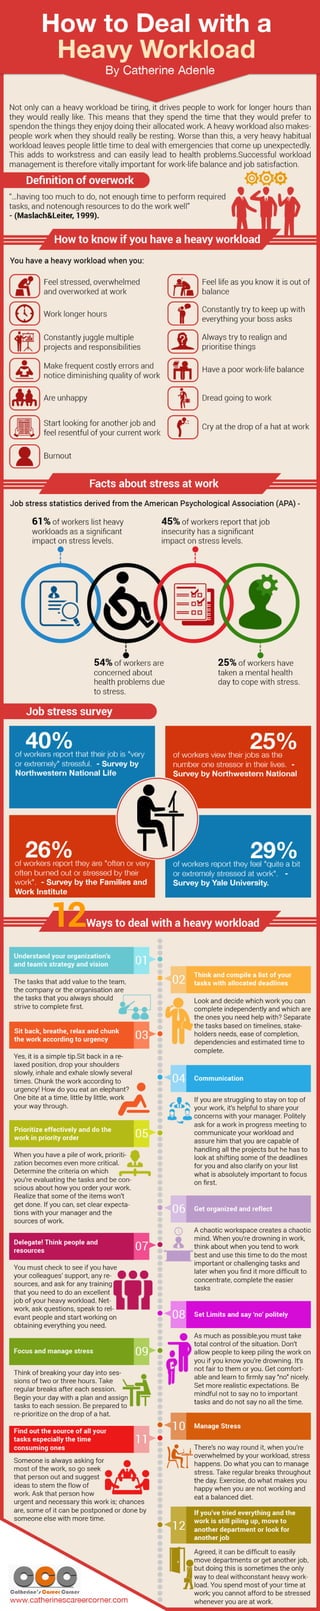 How to Deal with a Heavy Workload (Infographic)